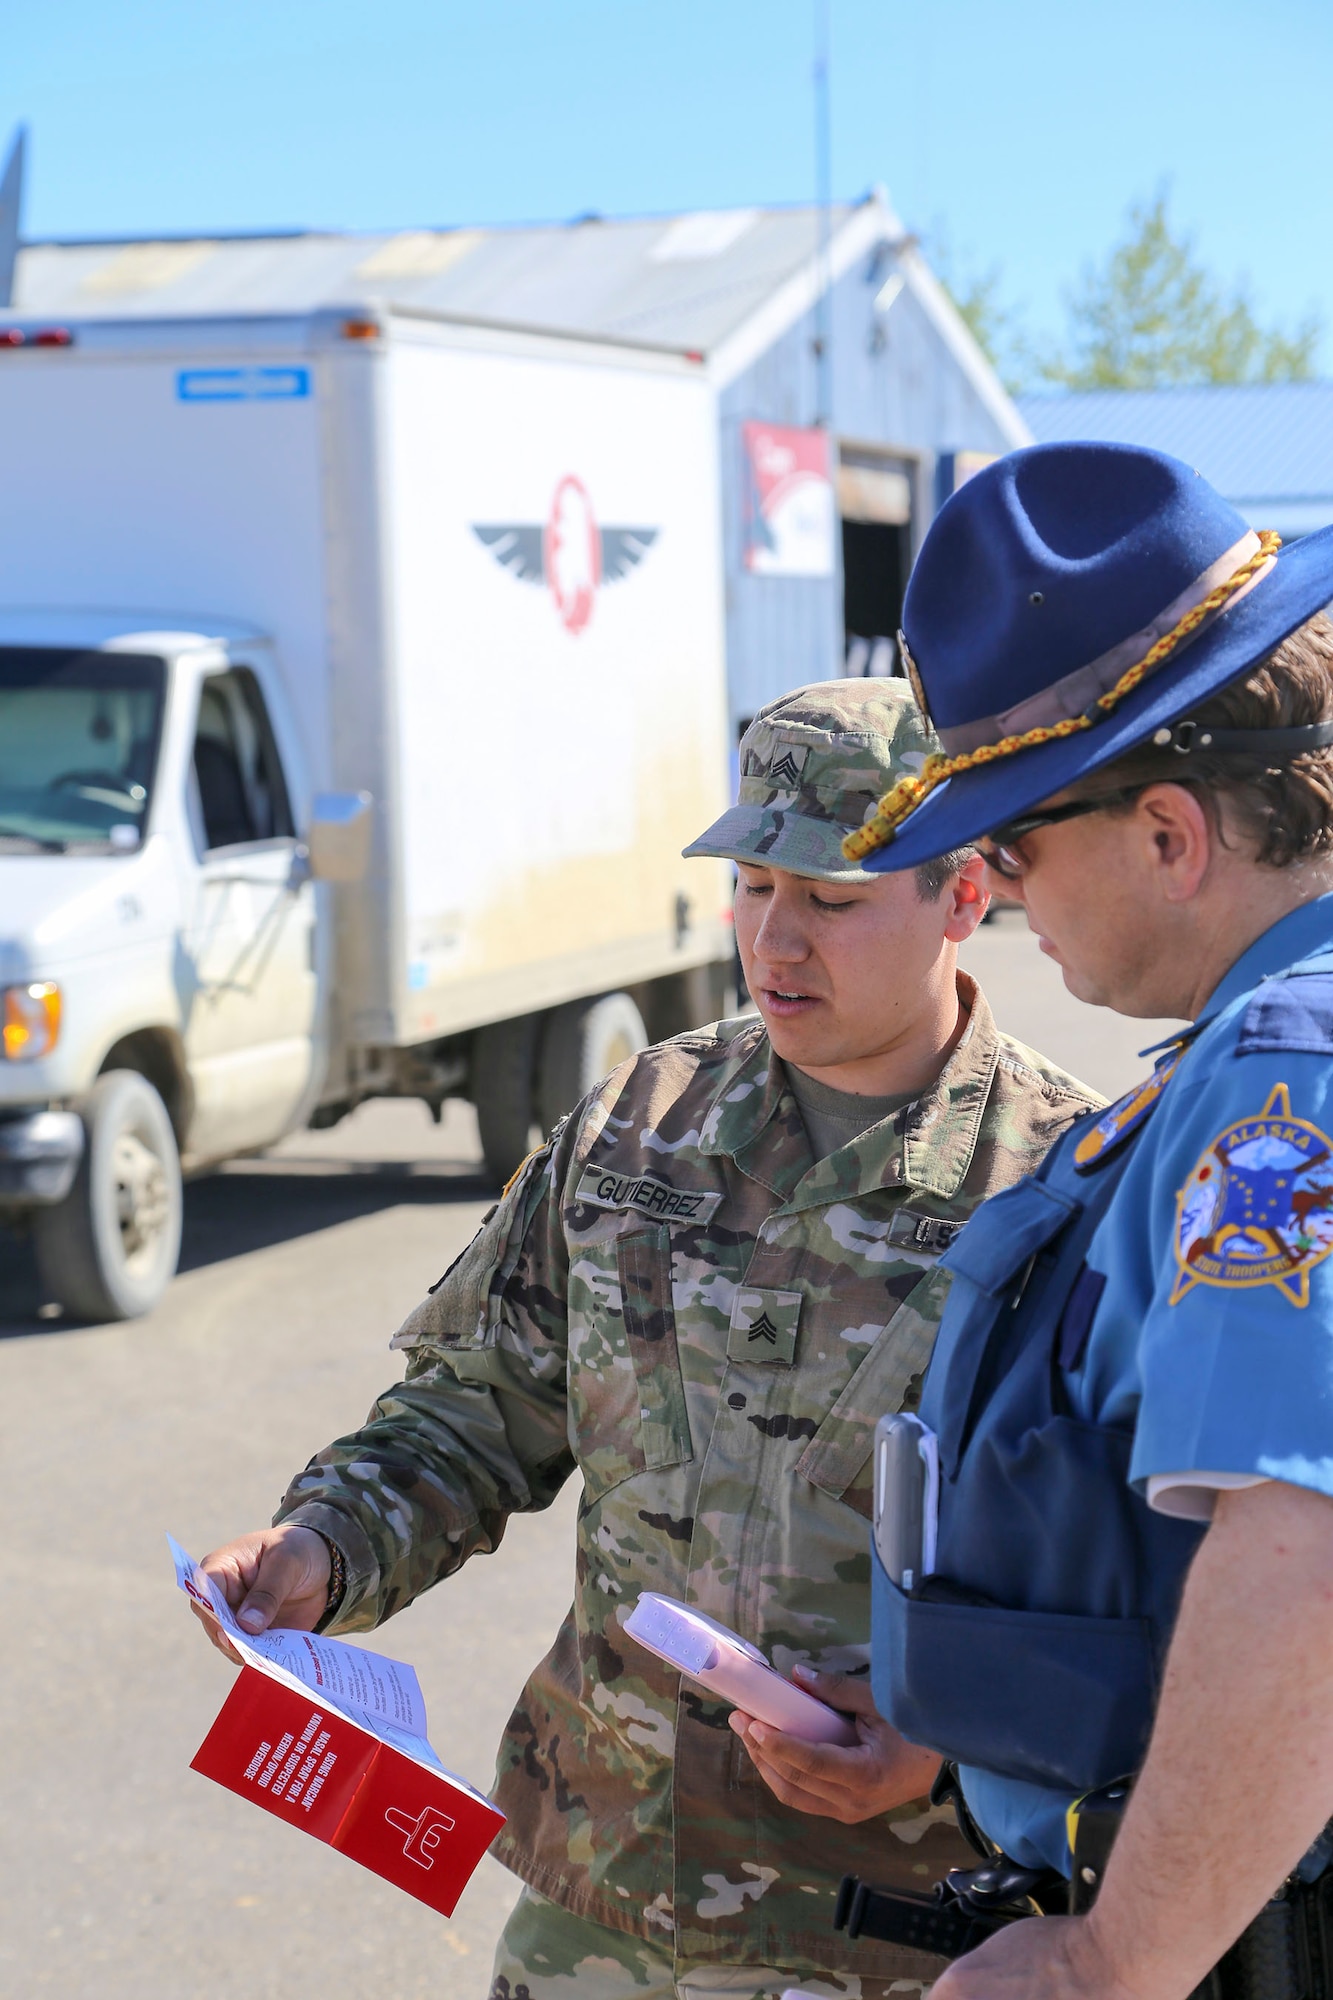 Alaska National Guard Sgt. Elijah Gutierrez, a civil operator with the Counter Drug Support Program, discusses the procedures for using the Narcan kit with Alaska State Trooper James Lester at the Edward G. Pitka Sr. Airport in Galena, Alaska, May 31, 2017. Twelve Guardsmen from the CDSP traveled to the Yukon-Koyukuk Region hub to deliver the kits that block the effects of opioids and reverses an overdose, and to provide drug and alcohol education and prevention materials to local residents. (U.S. Army National Guard photo by Staff Sgt. Balinda O’Neal Dresel) 